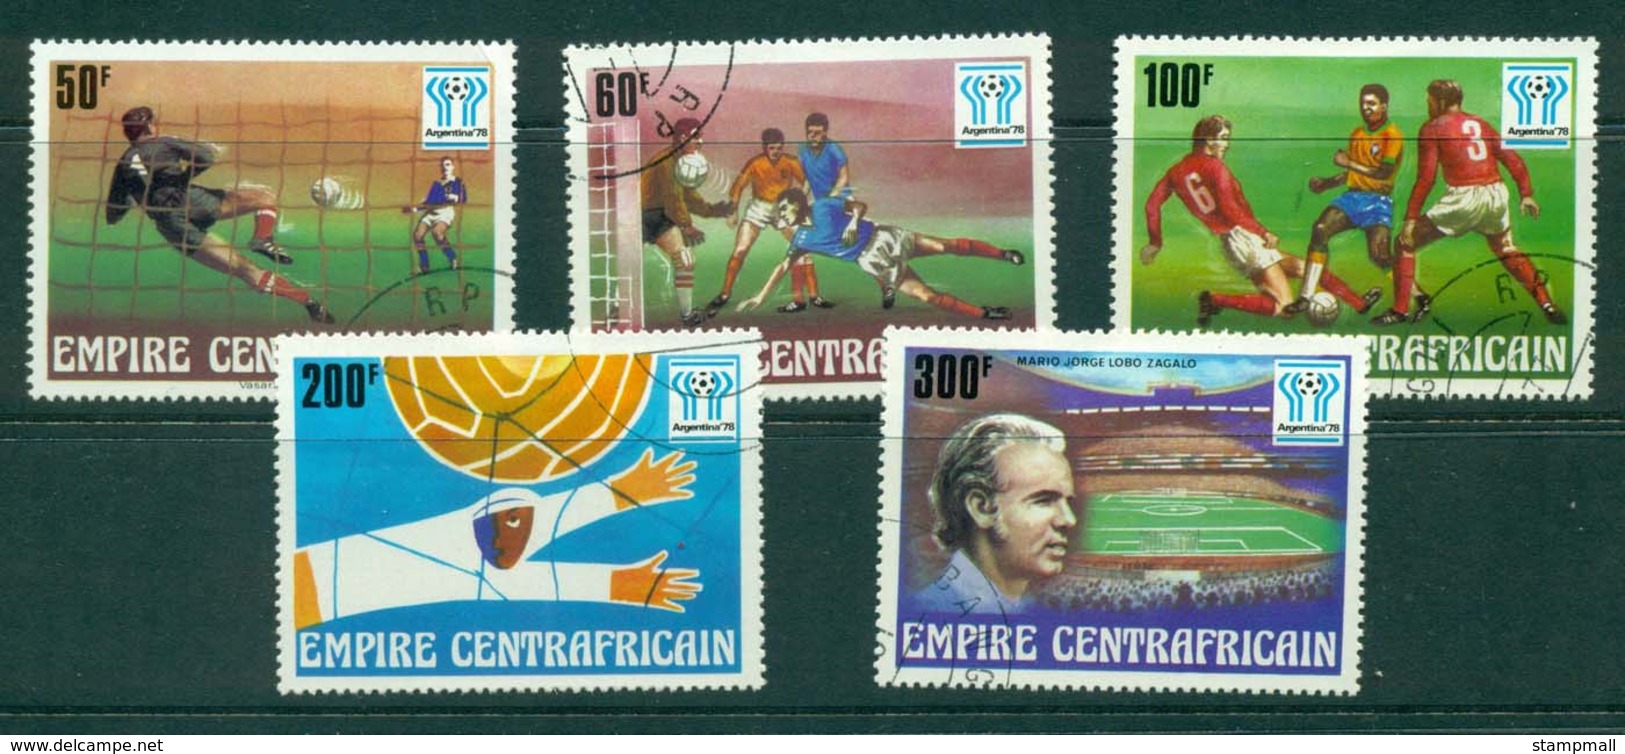 Central African Republic 1977 World Cup Soccer Argentina (50f Cnr Crease) CTO Lot31415 - Central African Republic